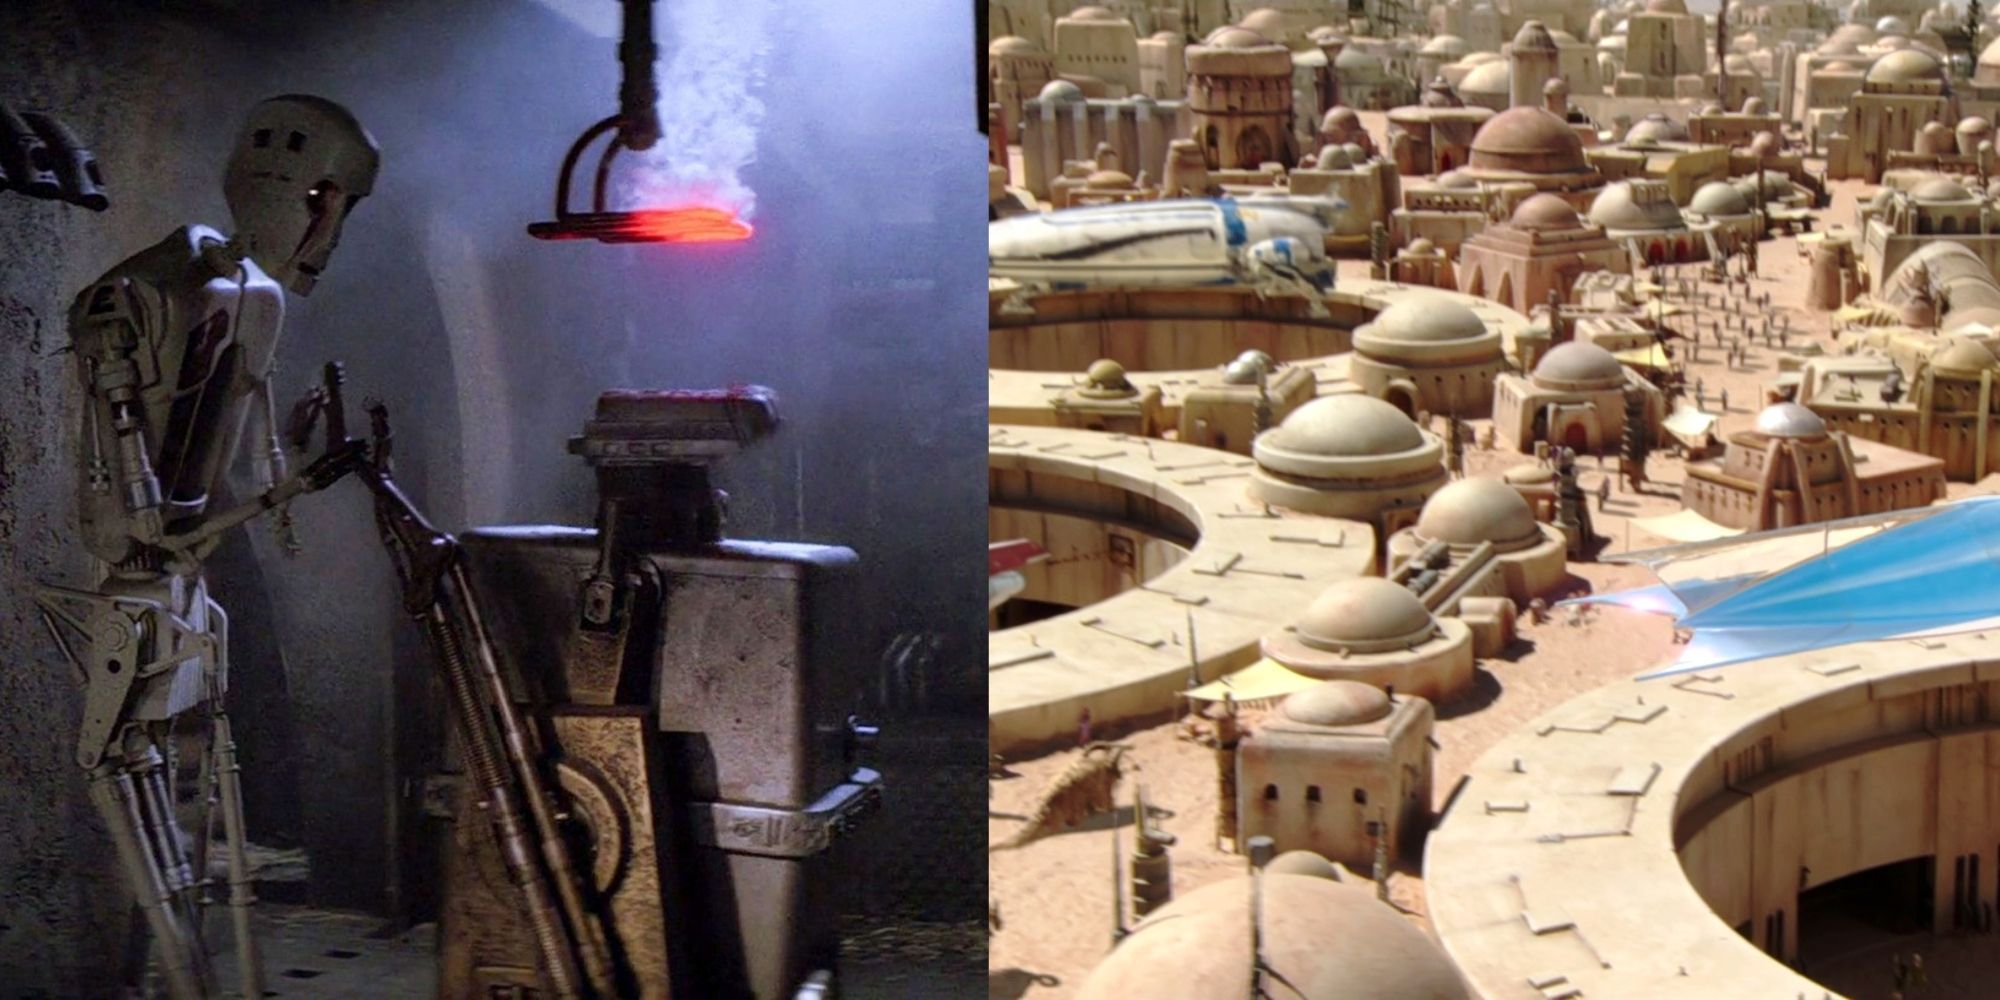 Split image of the 8D8 droid and location Mos Espa from Star Wars. 